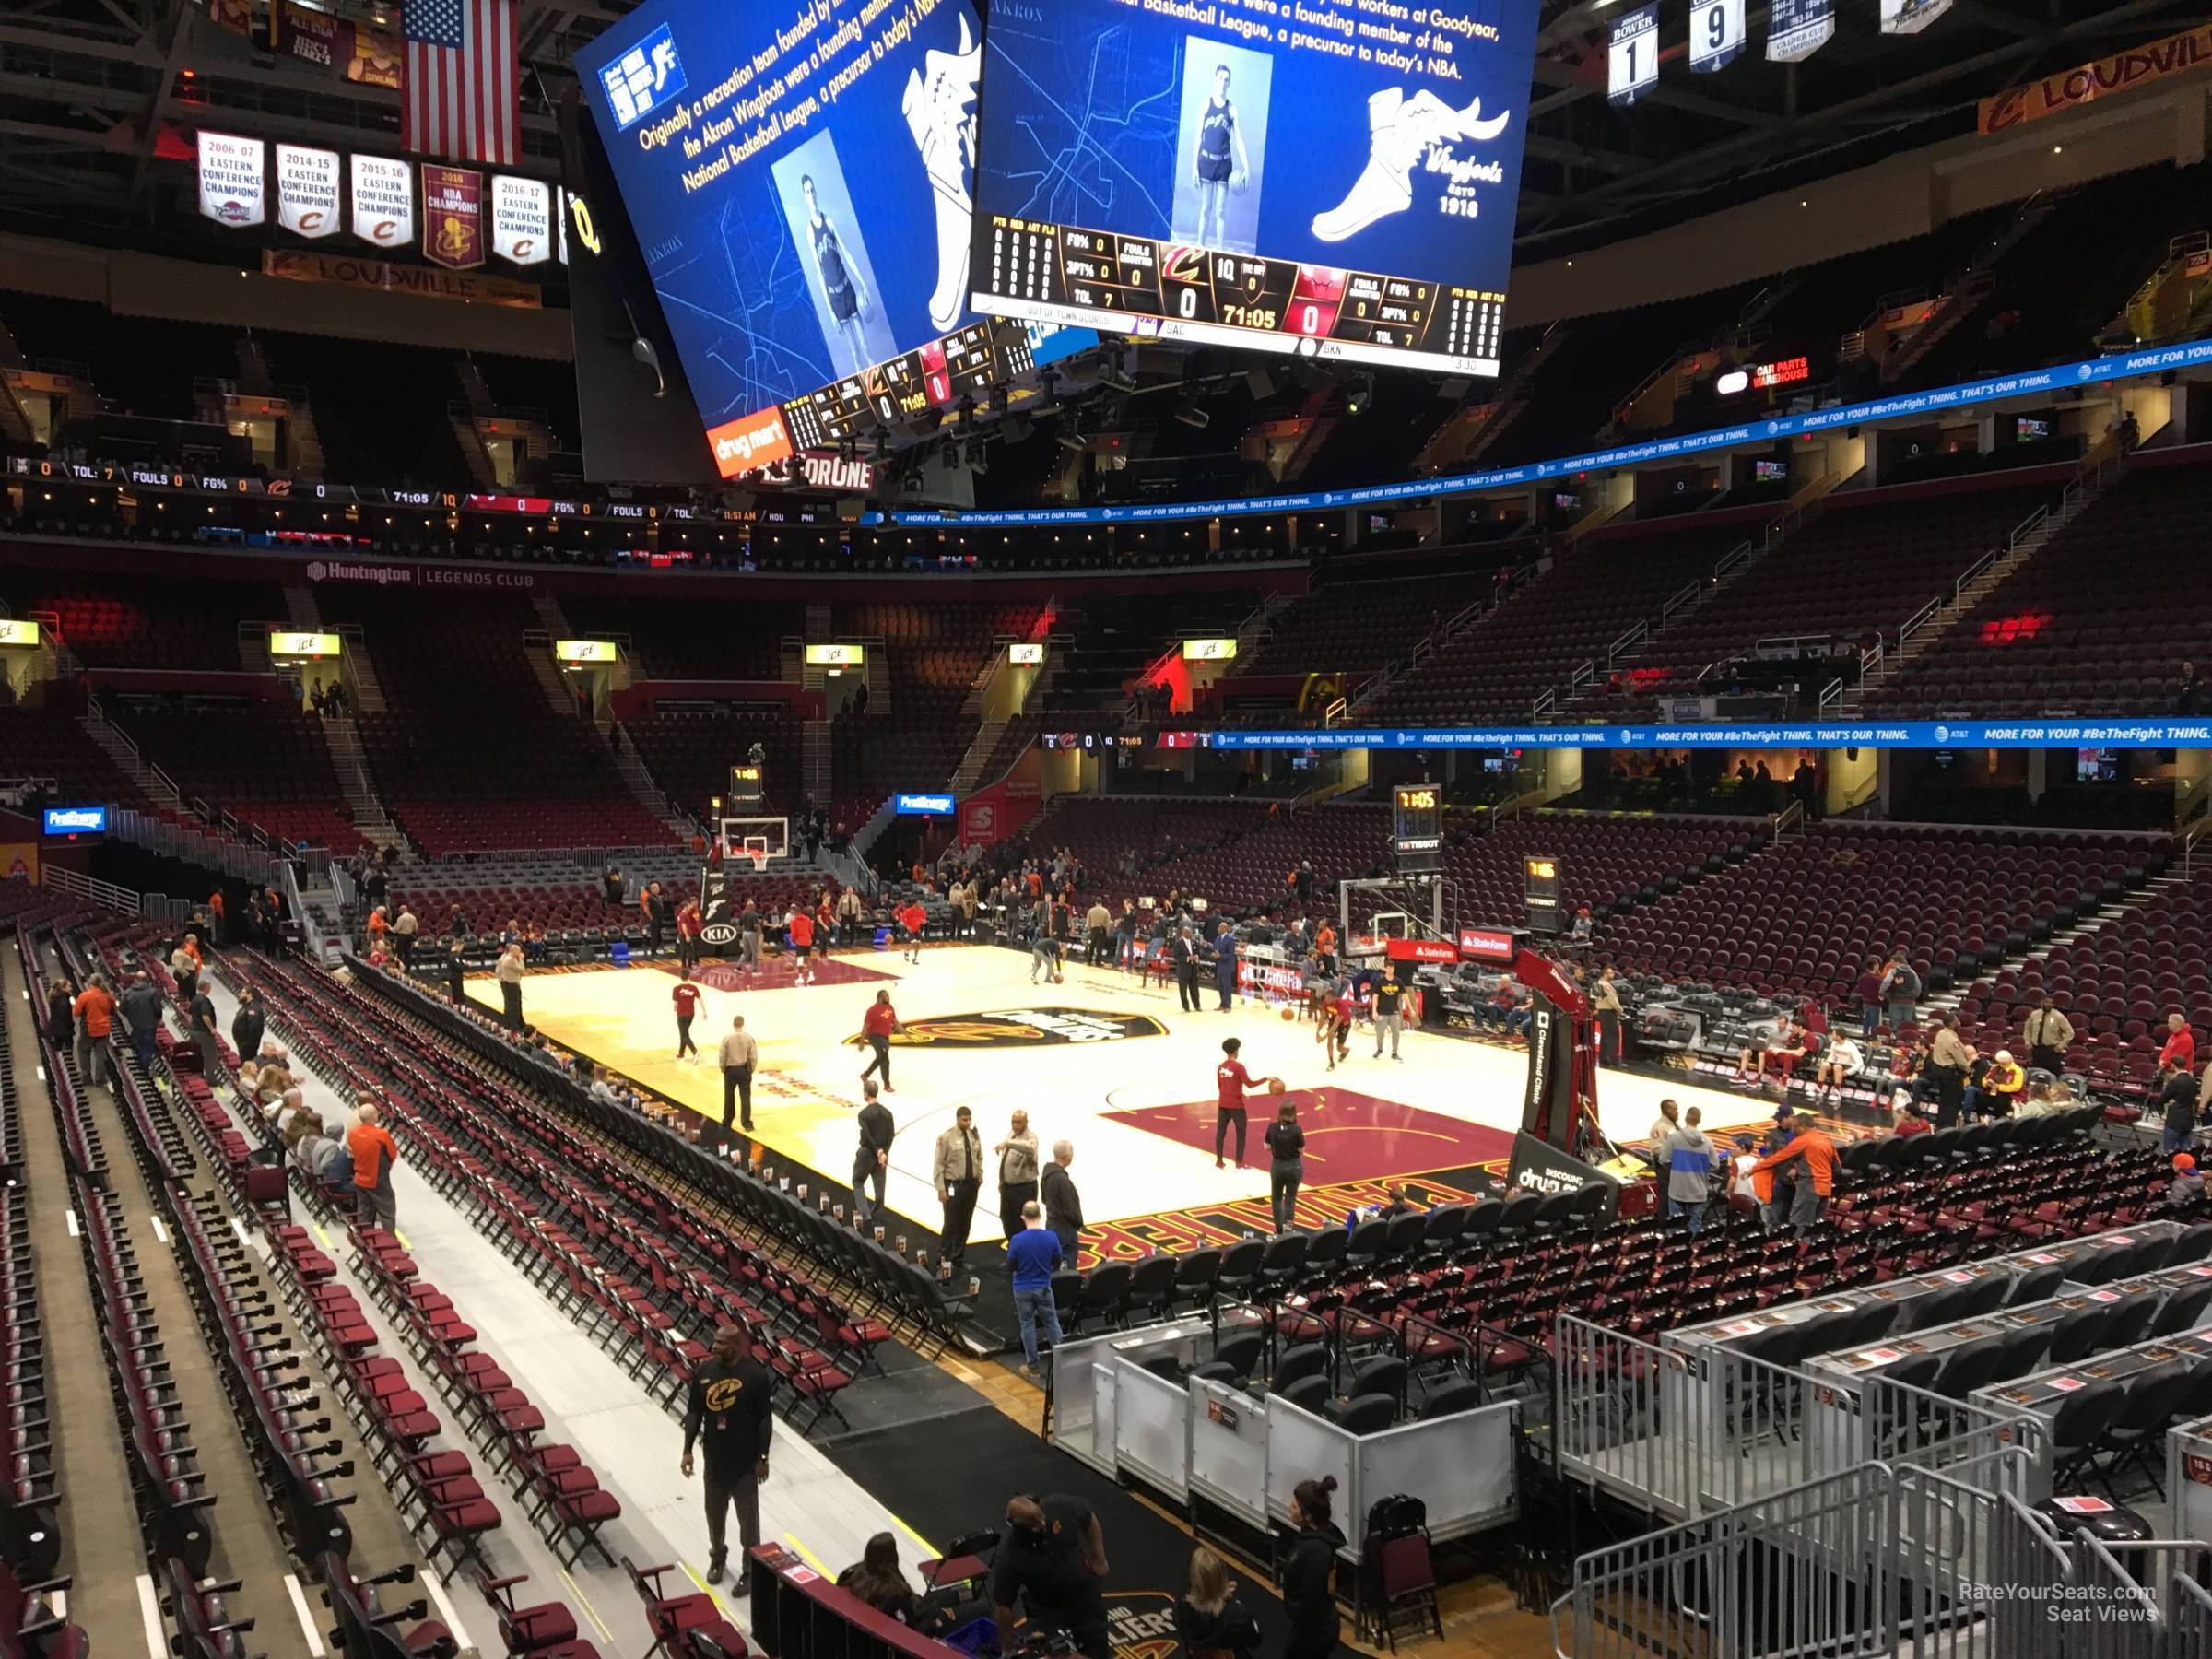 section 117, row 11 seat view  for basketball - rocket mortgage fieldhouse